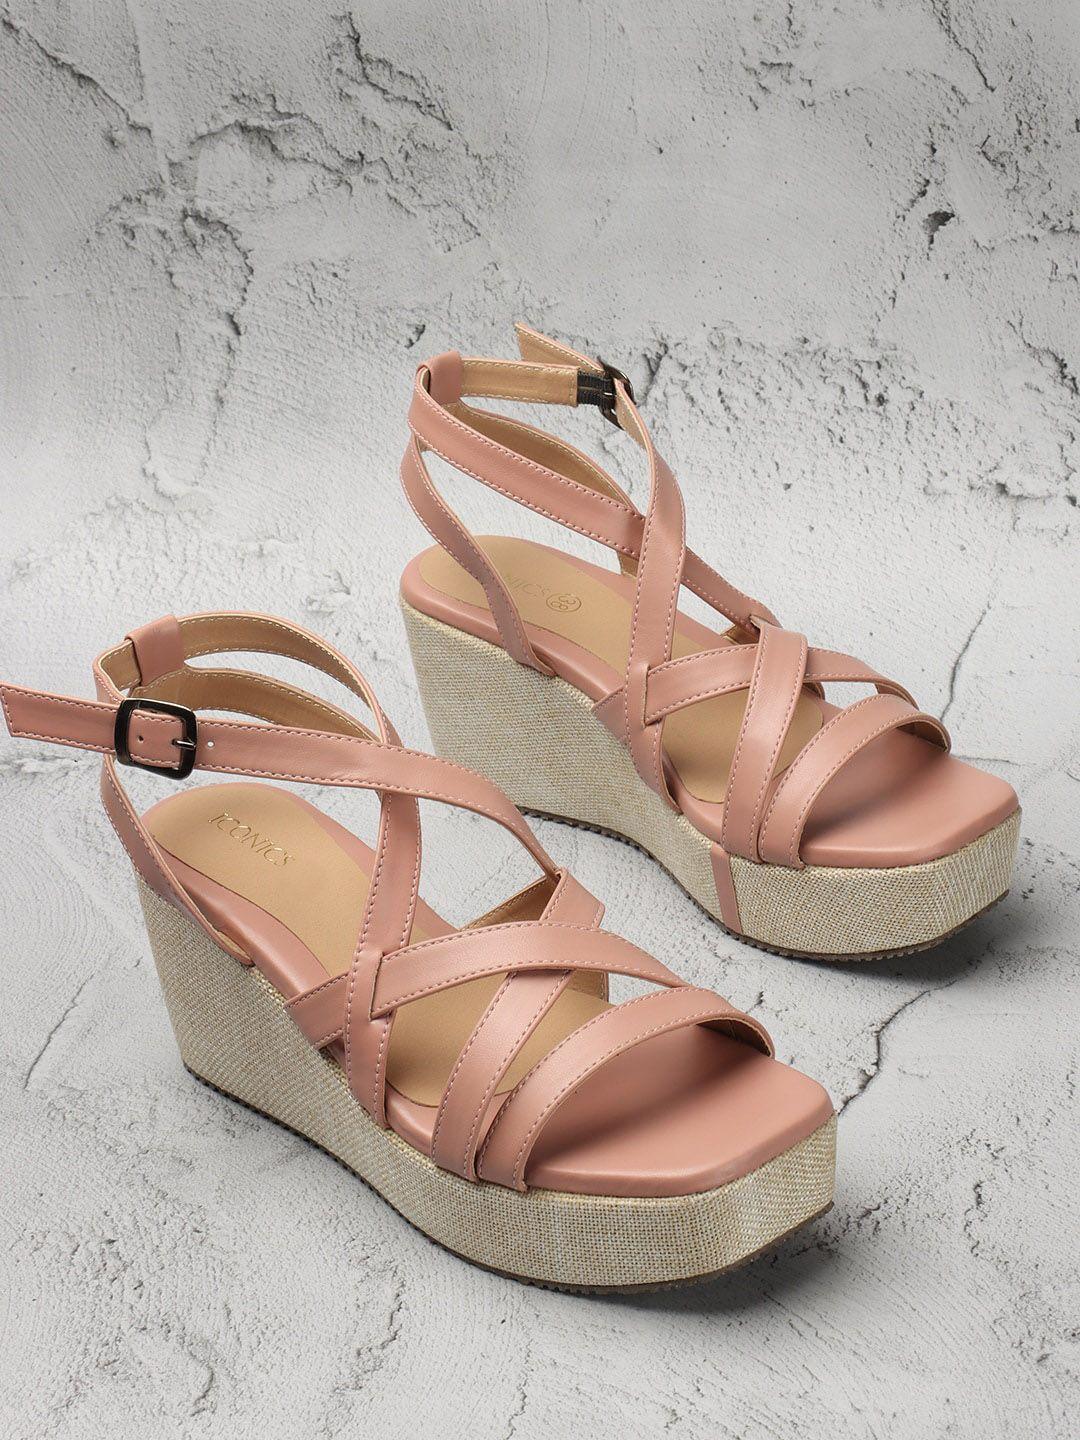 iconics strappy open toe wedges with buckles closure